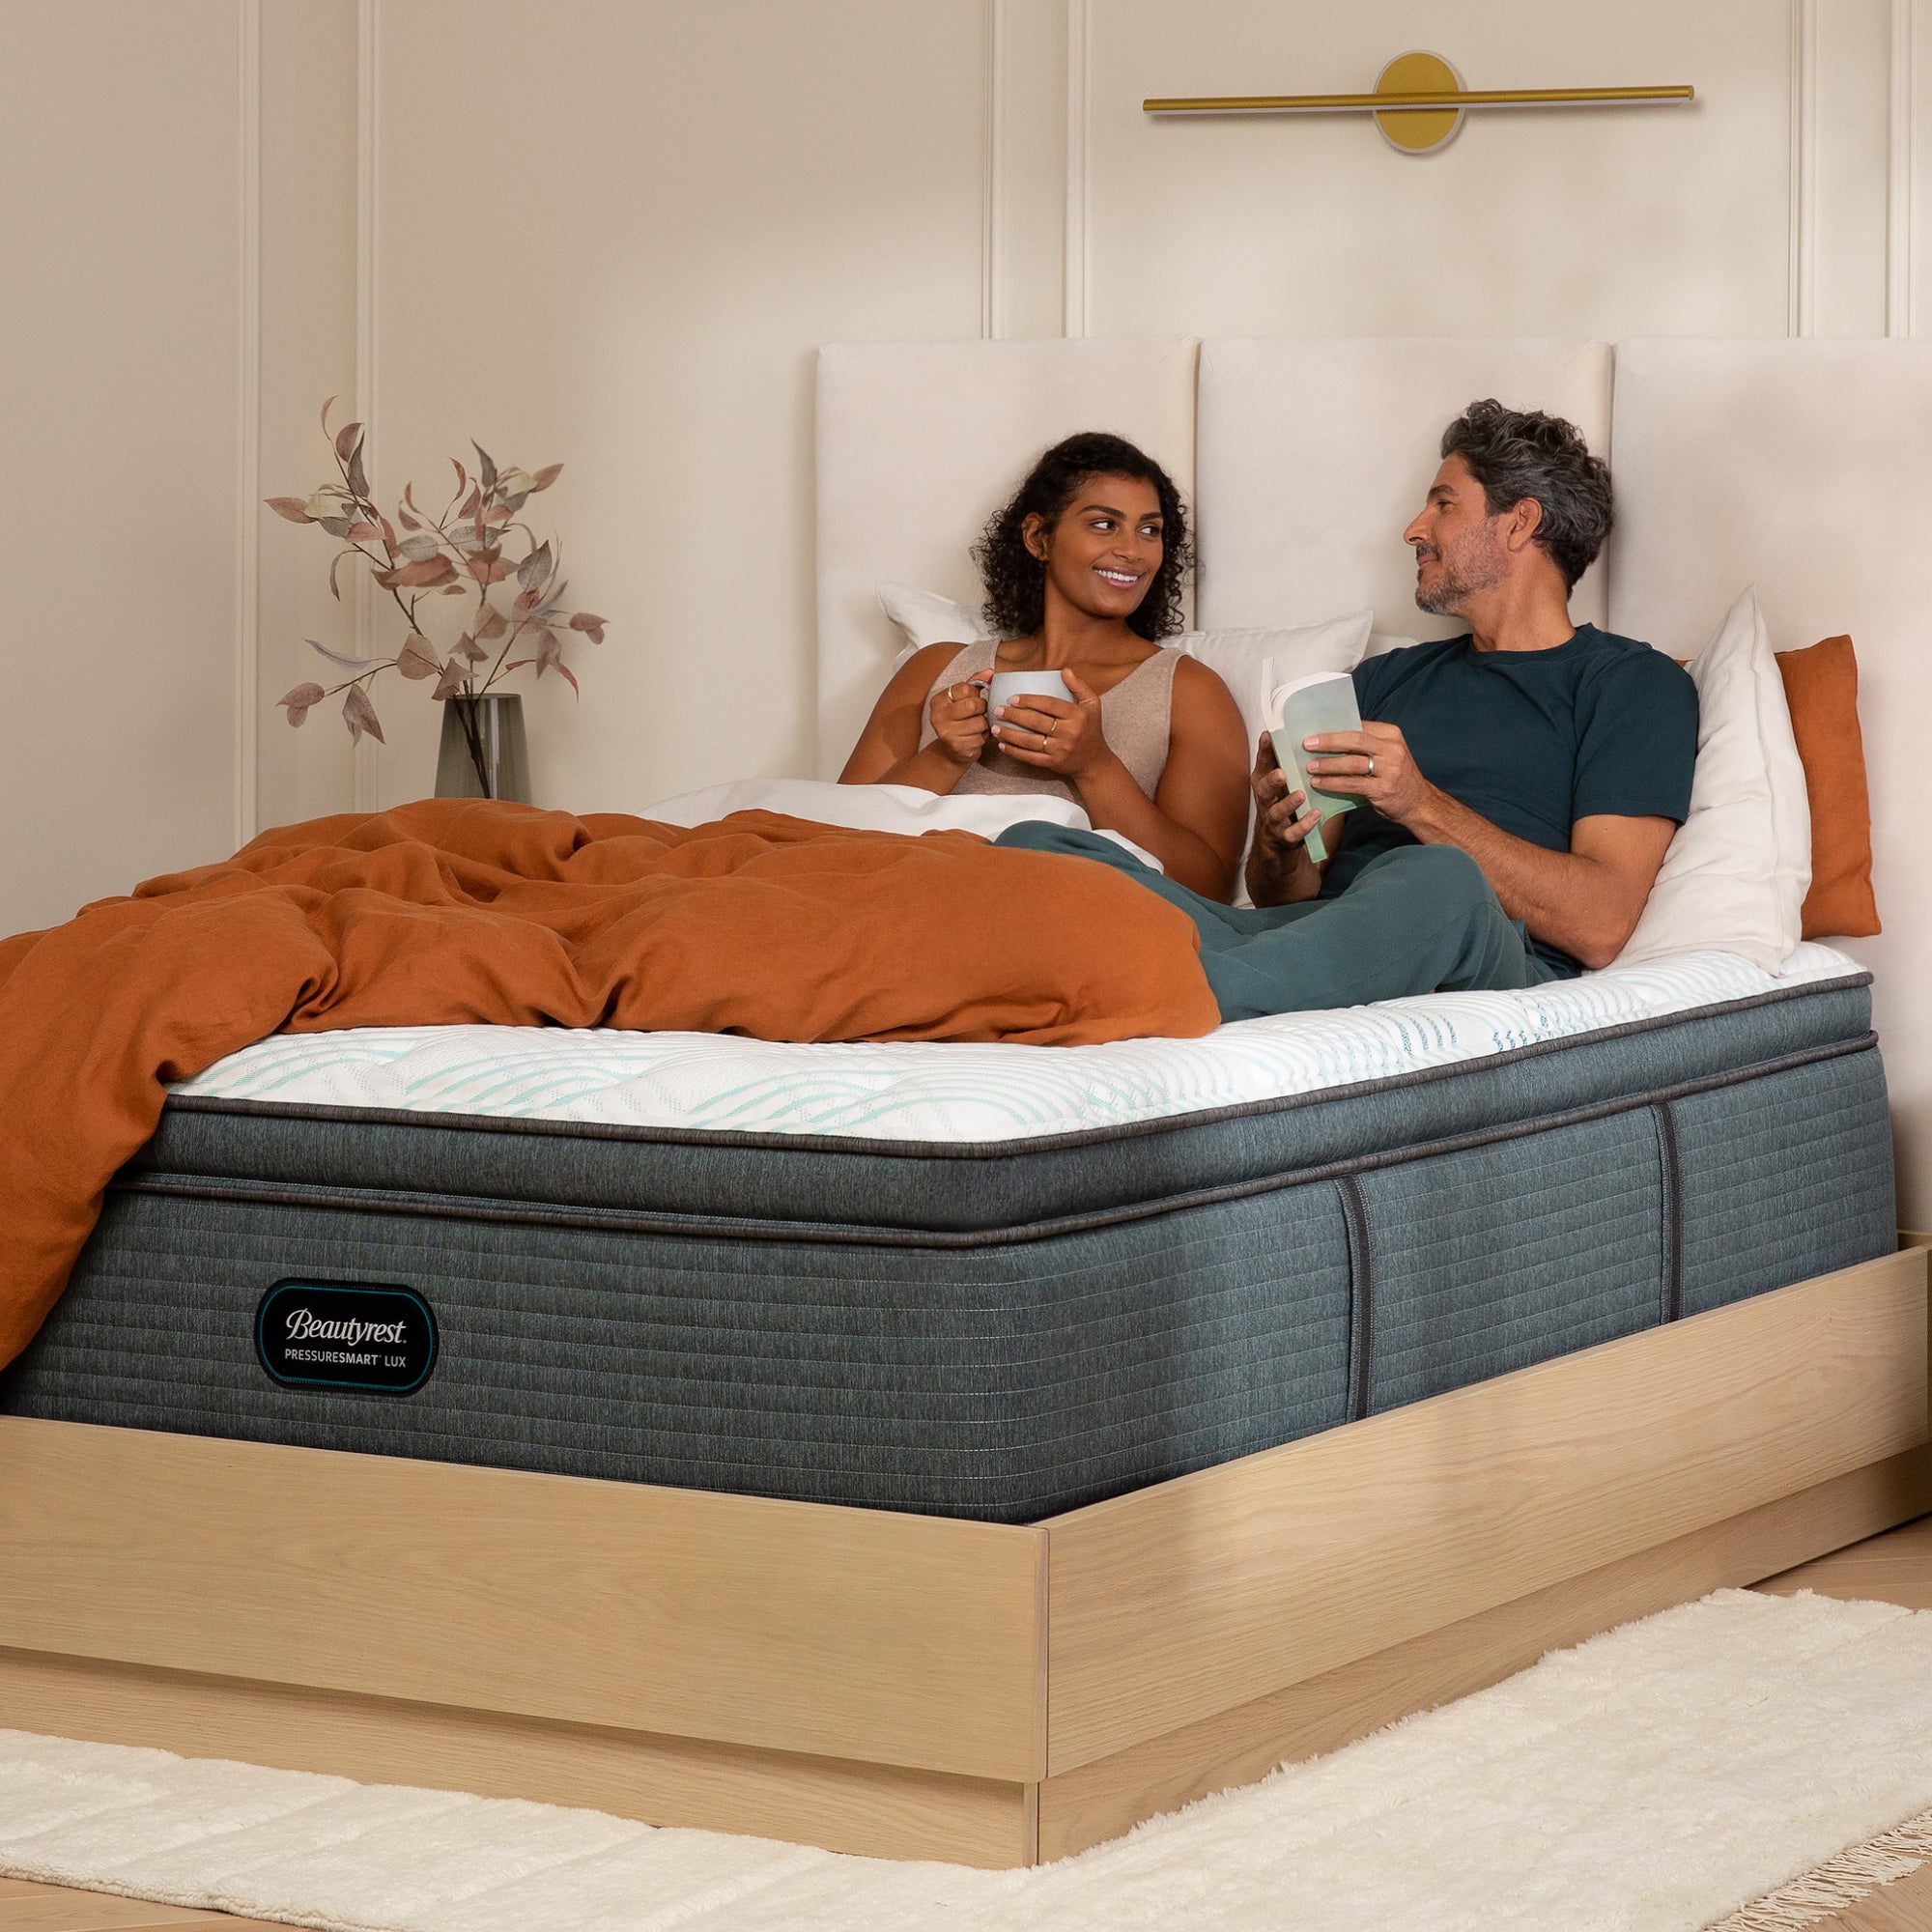 Man and woman enjoying coffee in bed on the Beautyrest PressureSmart mattress||feel: plush pillow top||series: lux